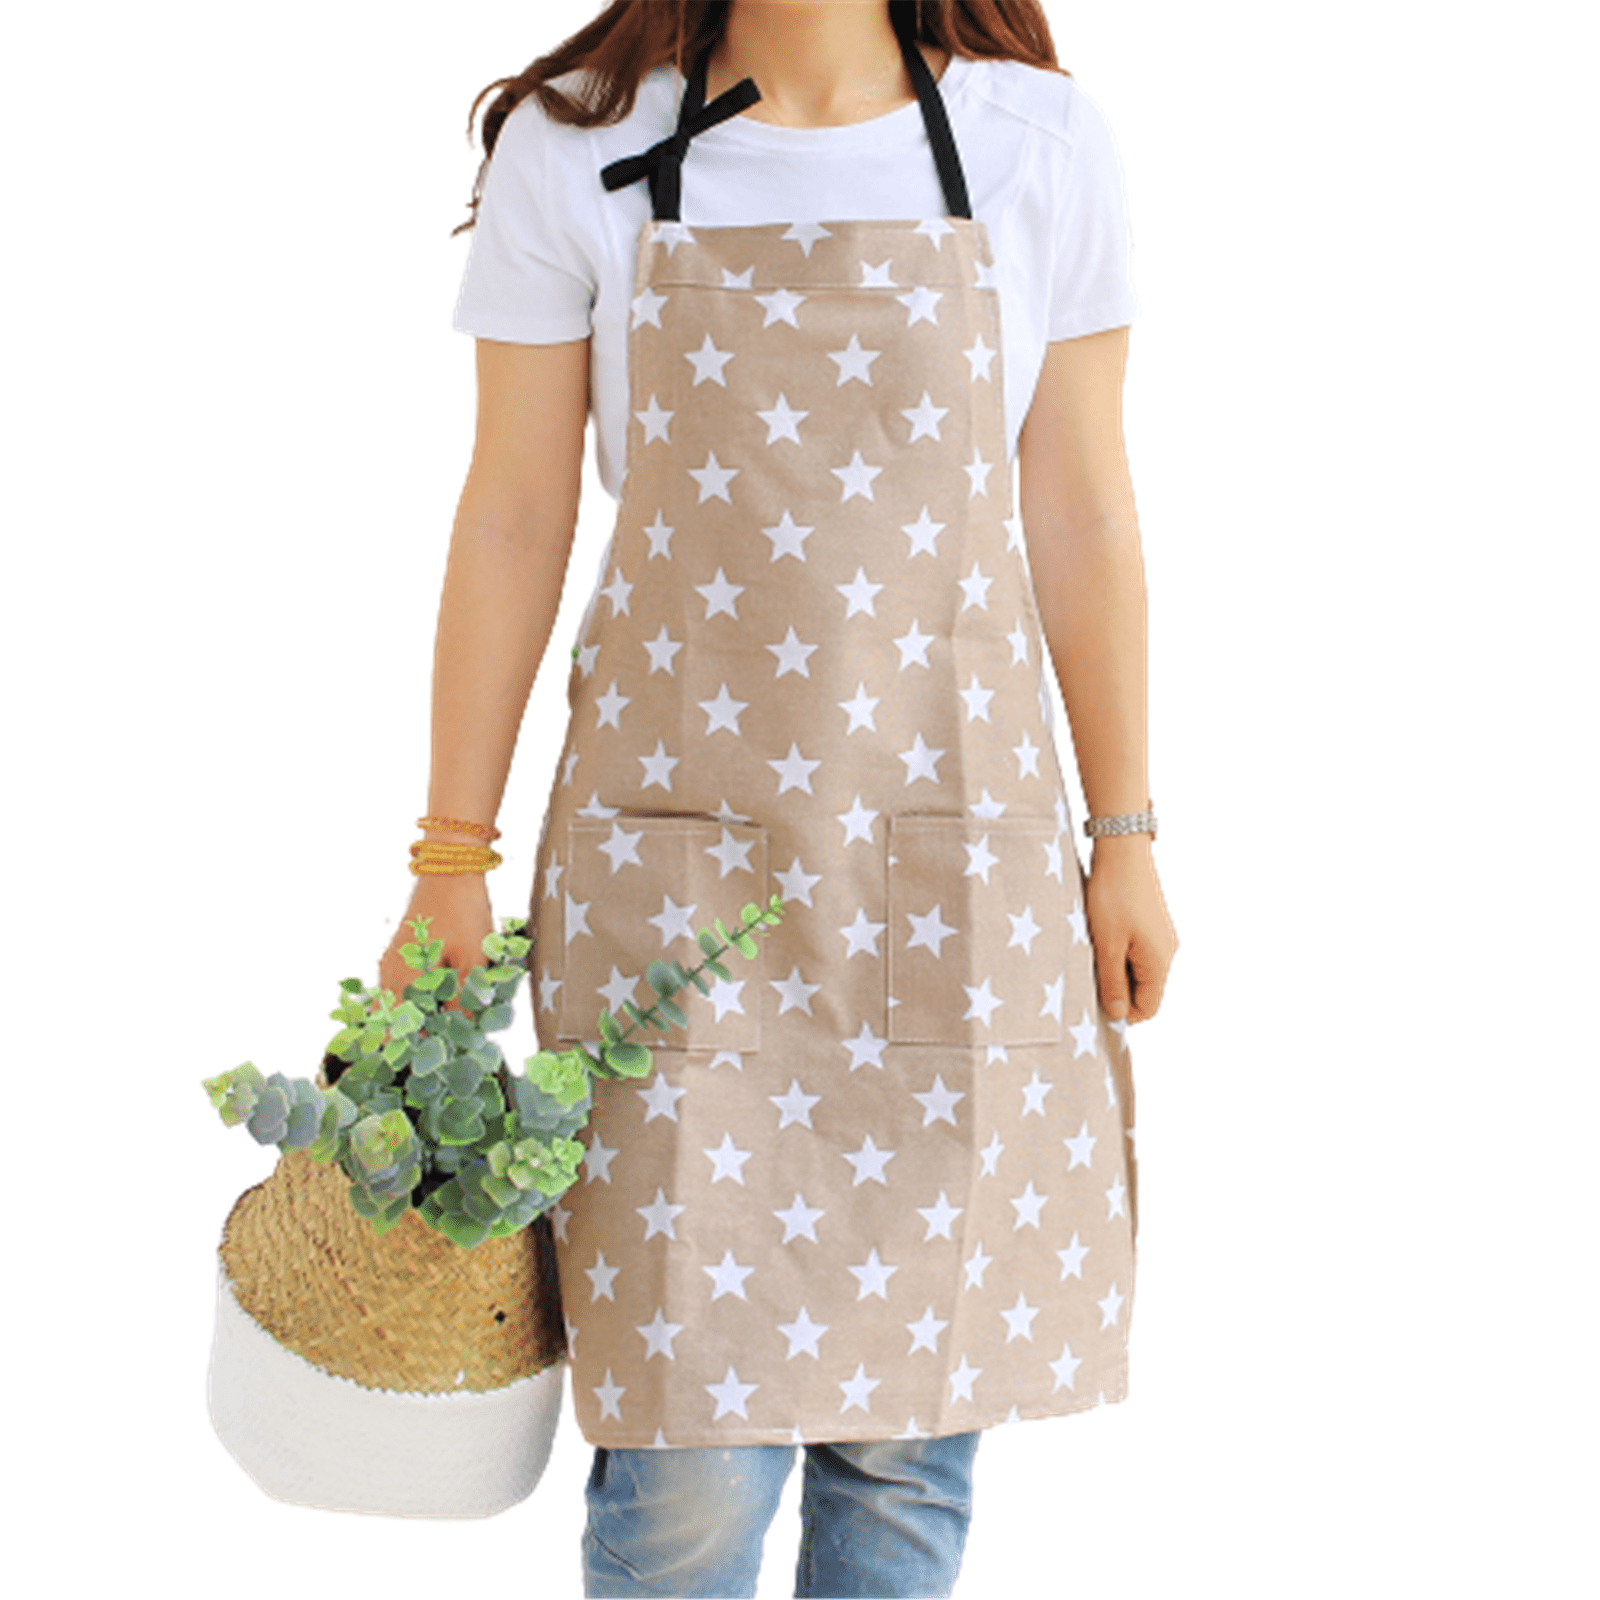 Details about   Splashproof Novelty Apron Galaxy 3 Cooking Painting Art Kitchen BBQ Gift 